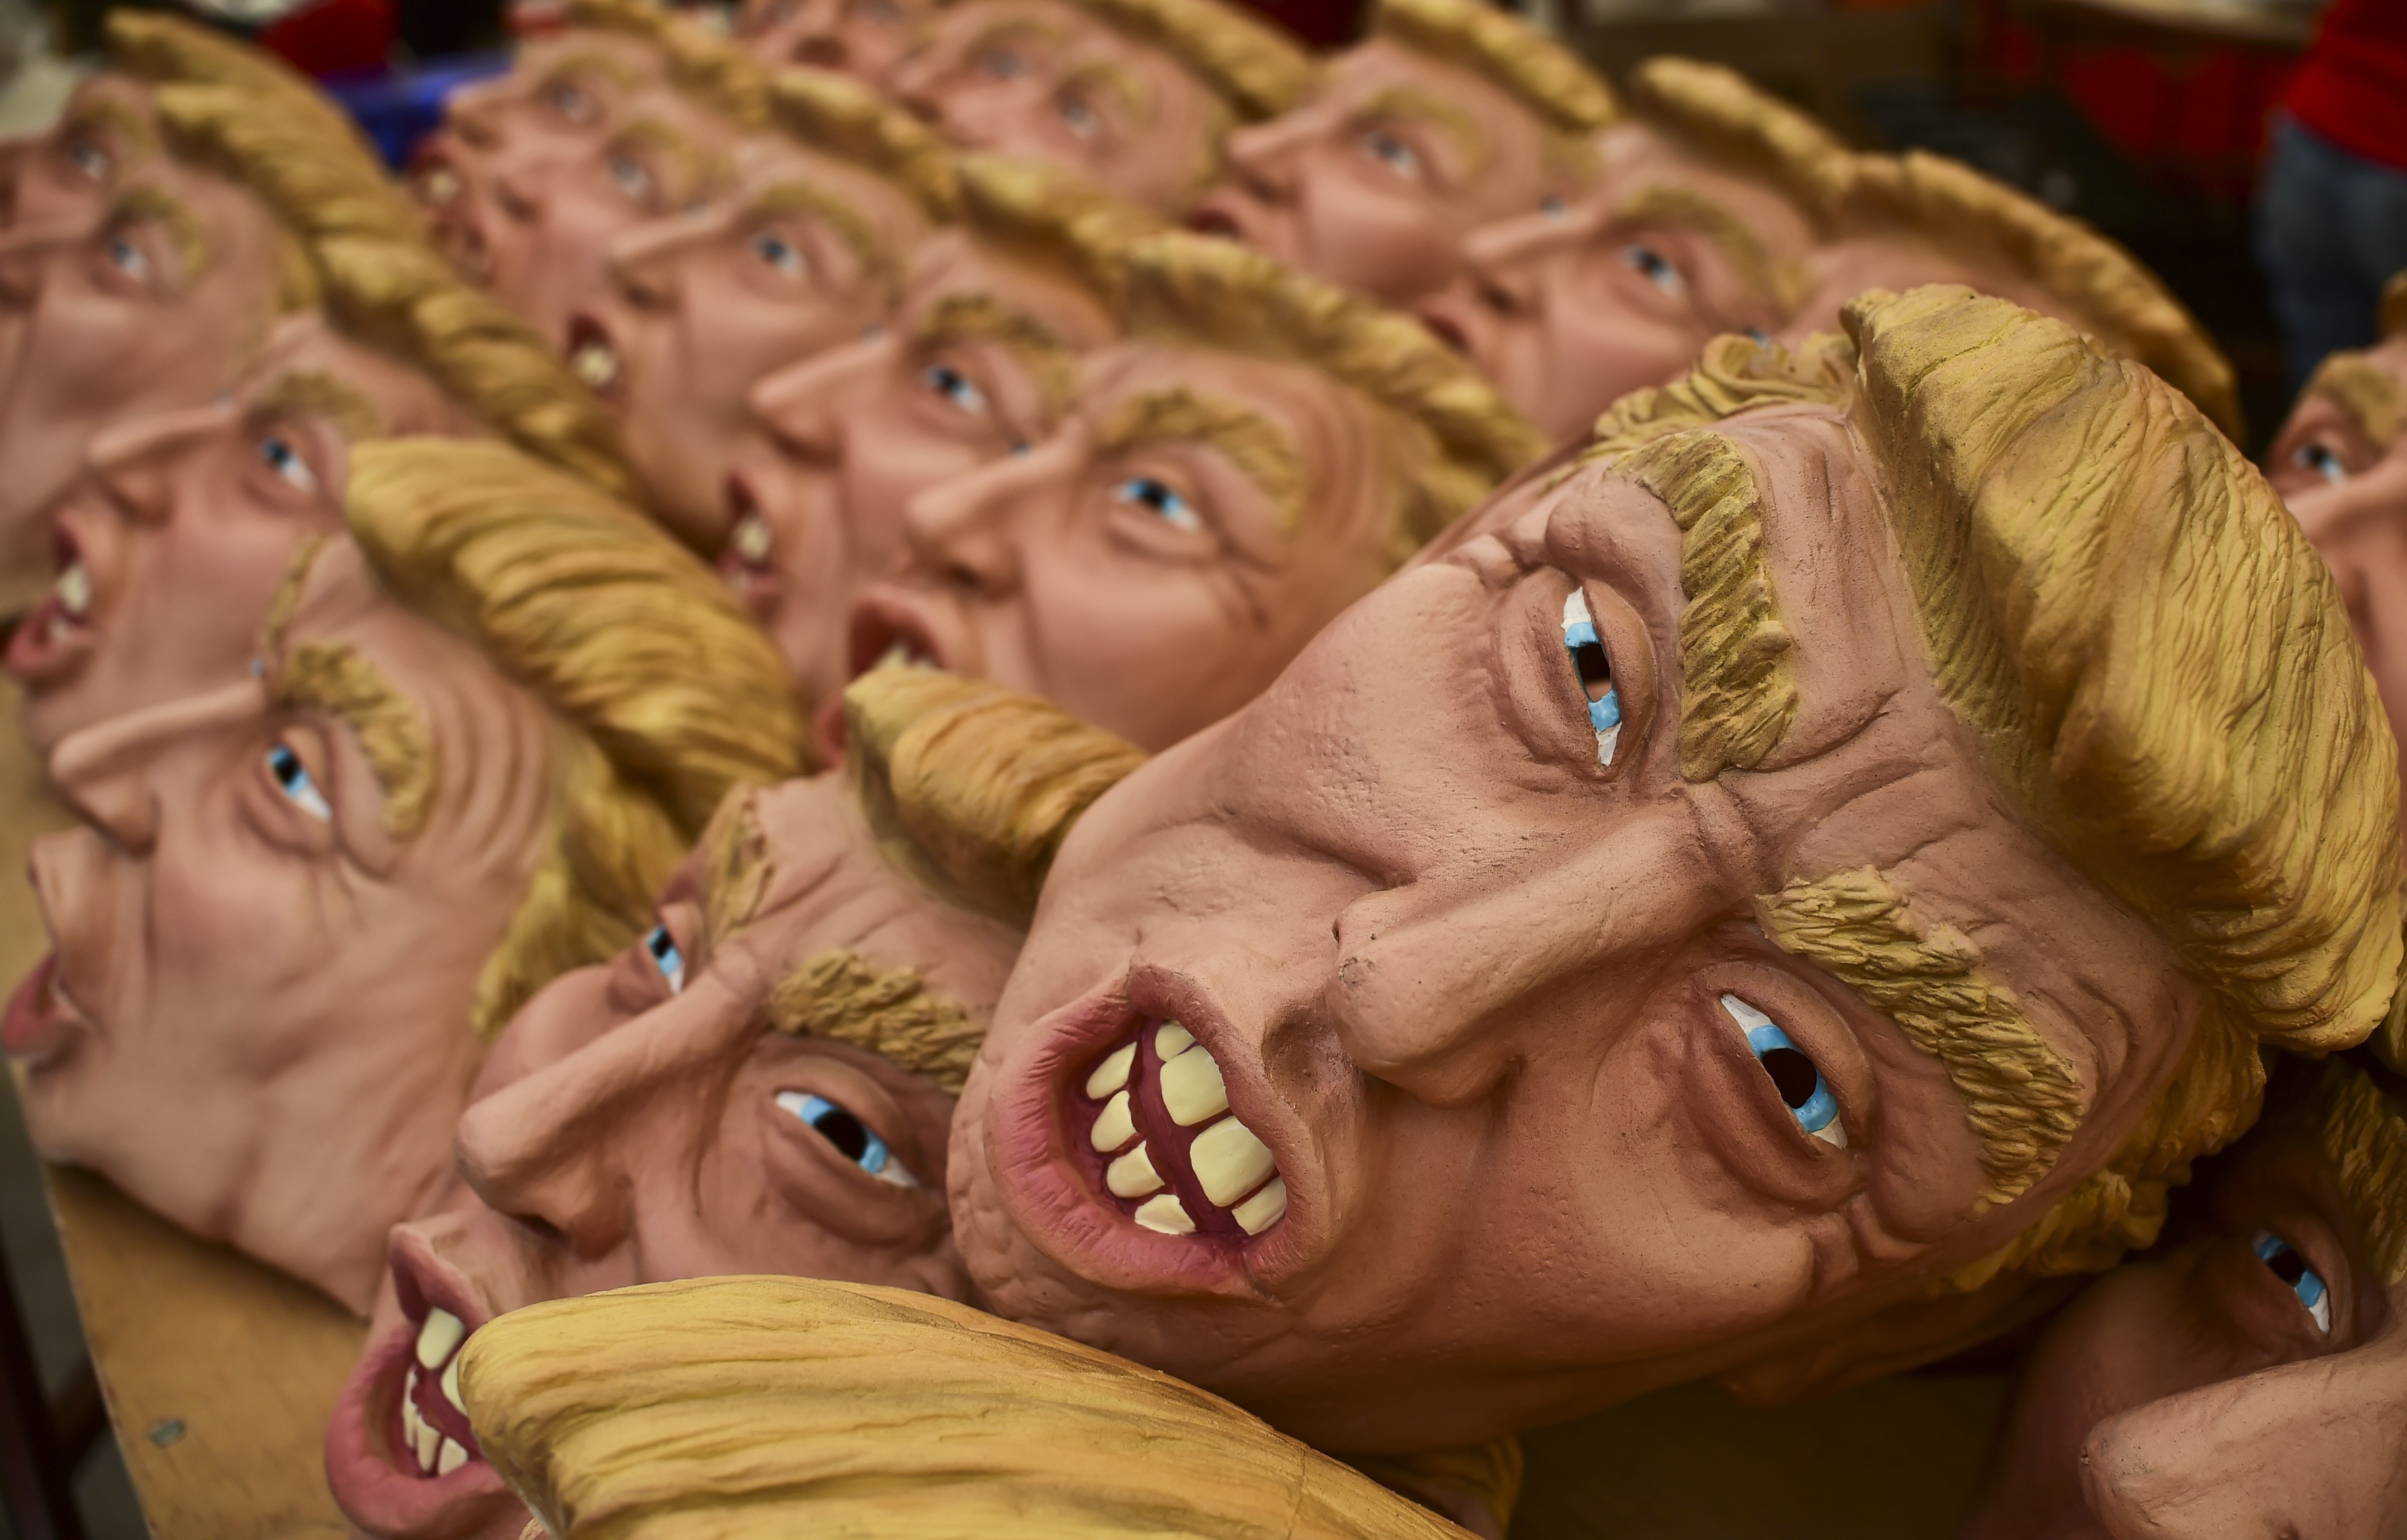 Masks representing Republican presidential candidate Donald Trump are pictured in a factory of costumes and masks, on Oct. 16, 2015, in Jiutepec, Morelos State.